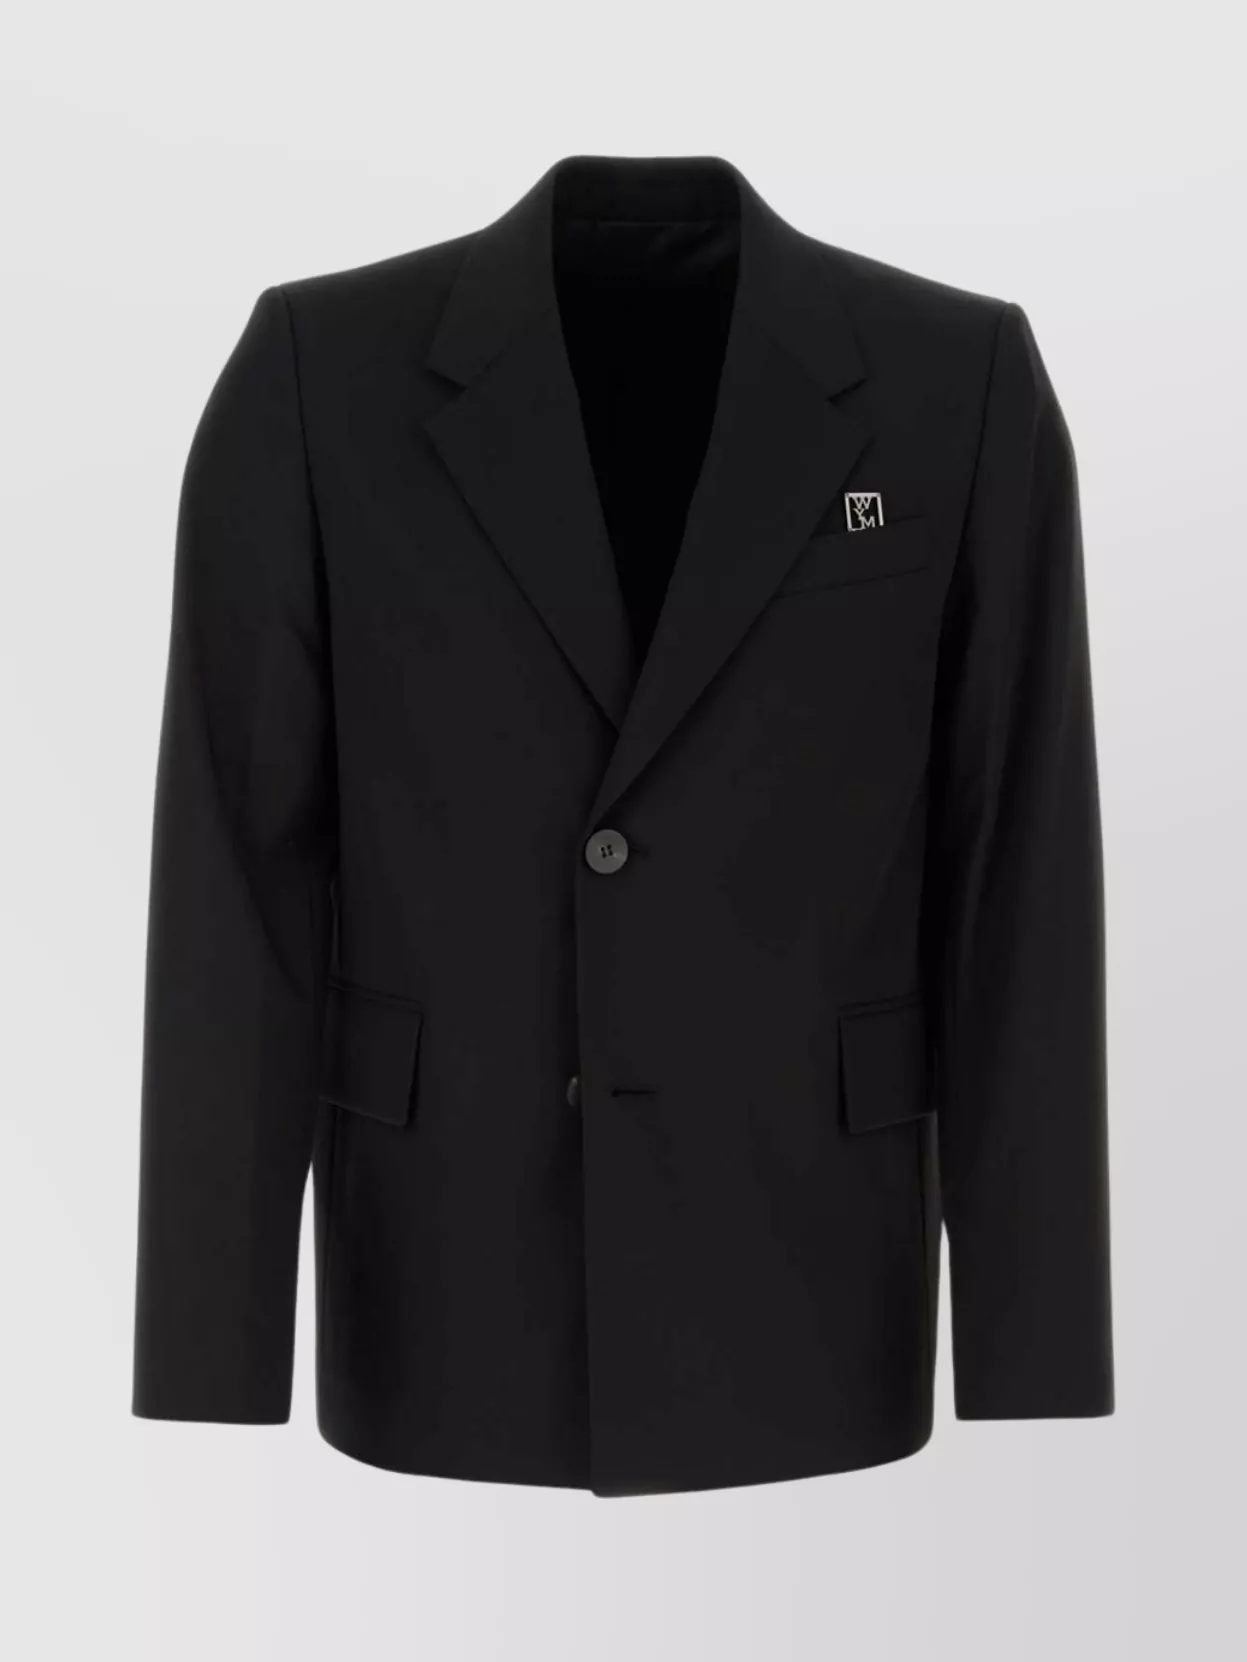 Shop Wooyoungmi Blazer Tailored Structured Shoulders